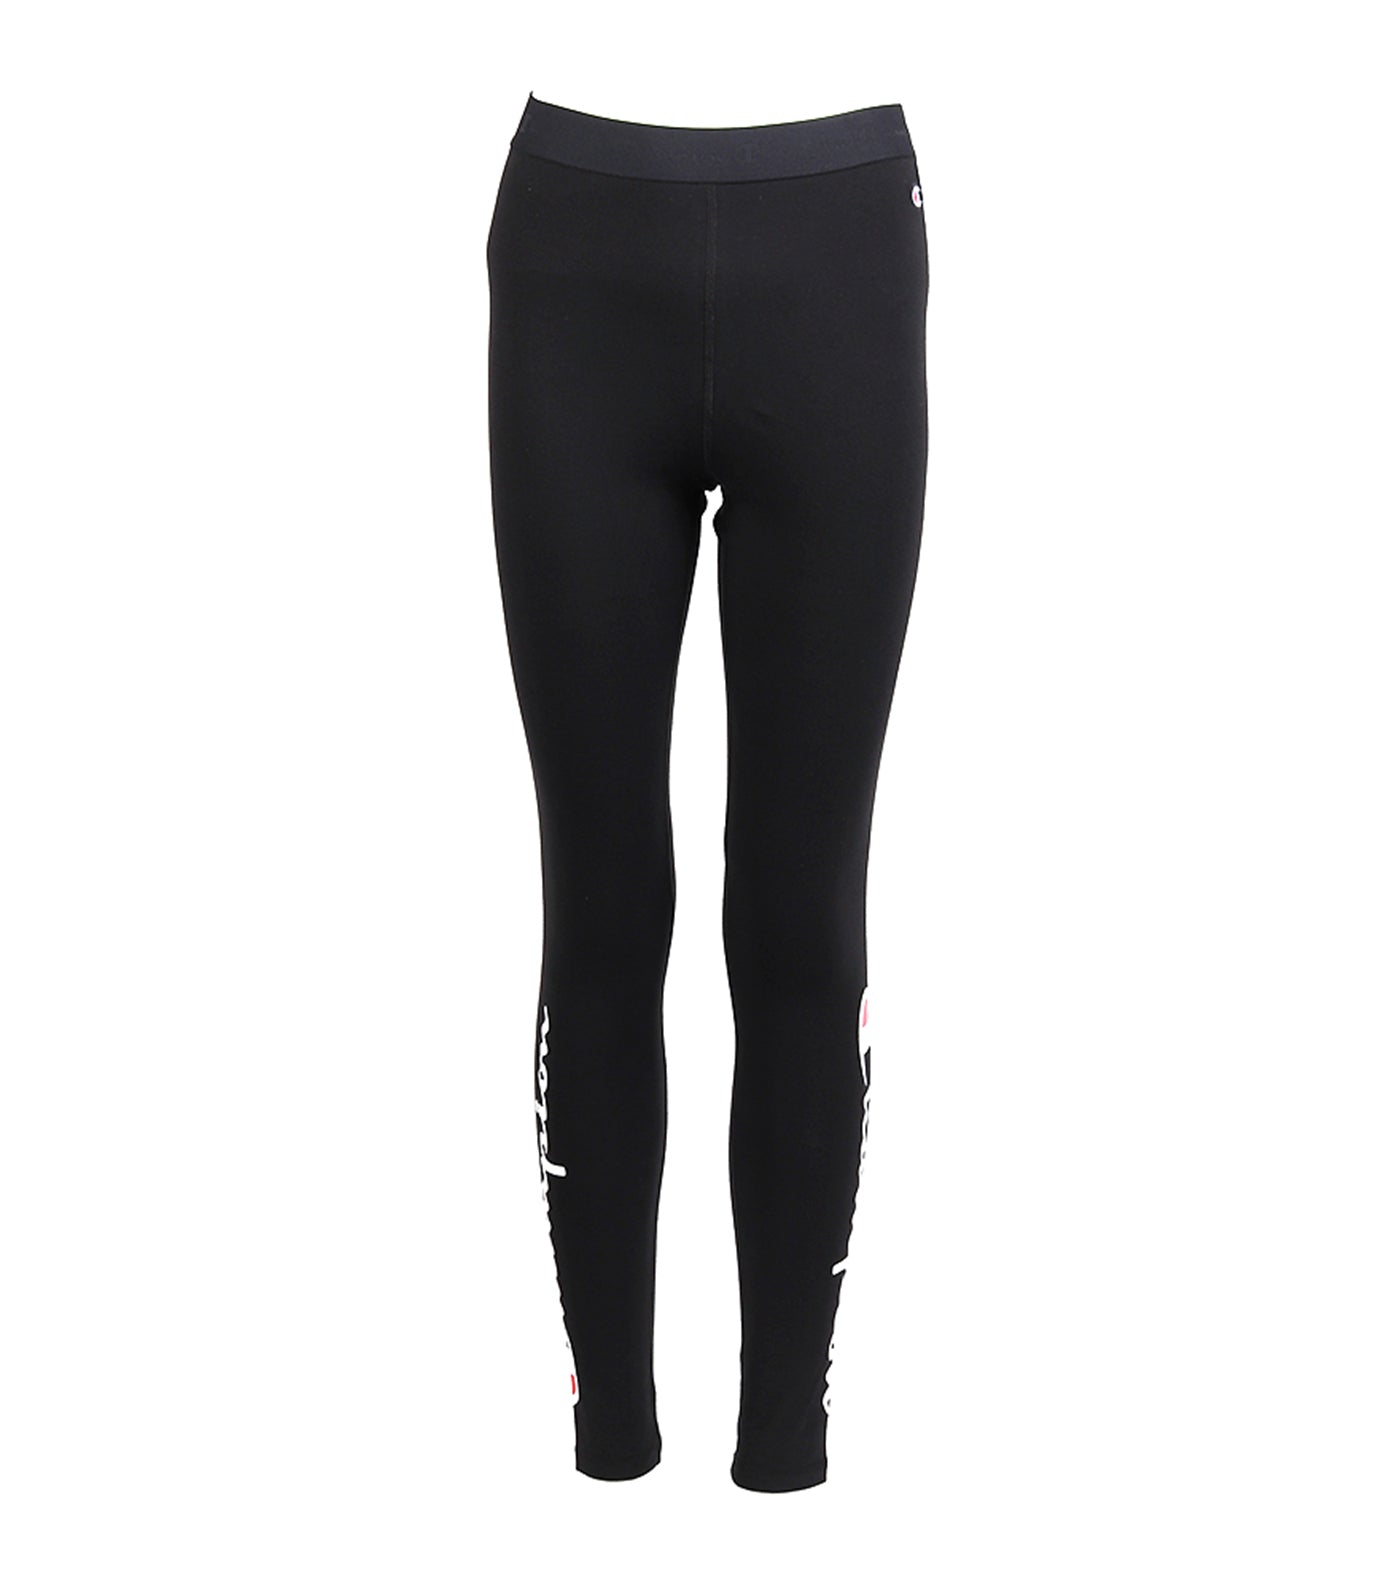 Rustan's - Put an edgy twist to the original SPANX with these faux leather  moto leggings available at Rustan's.